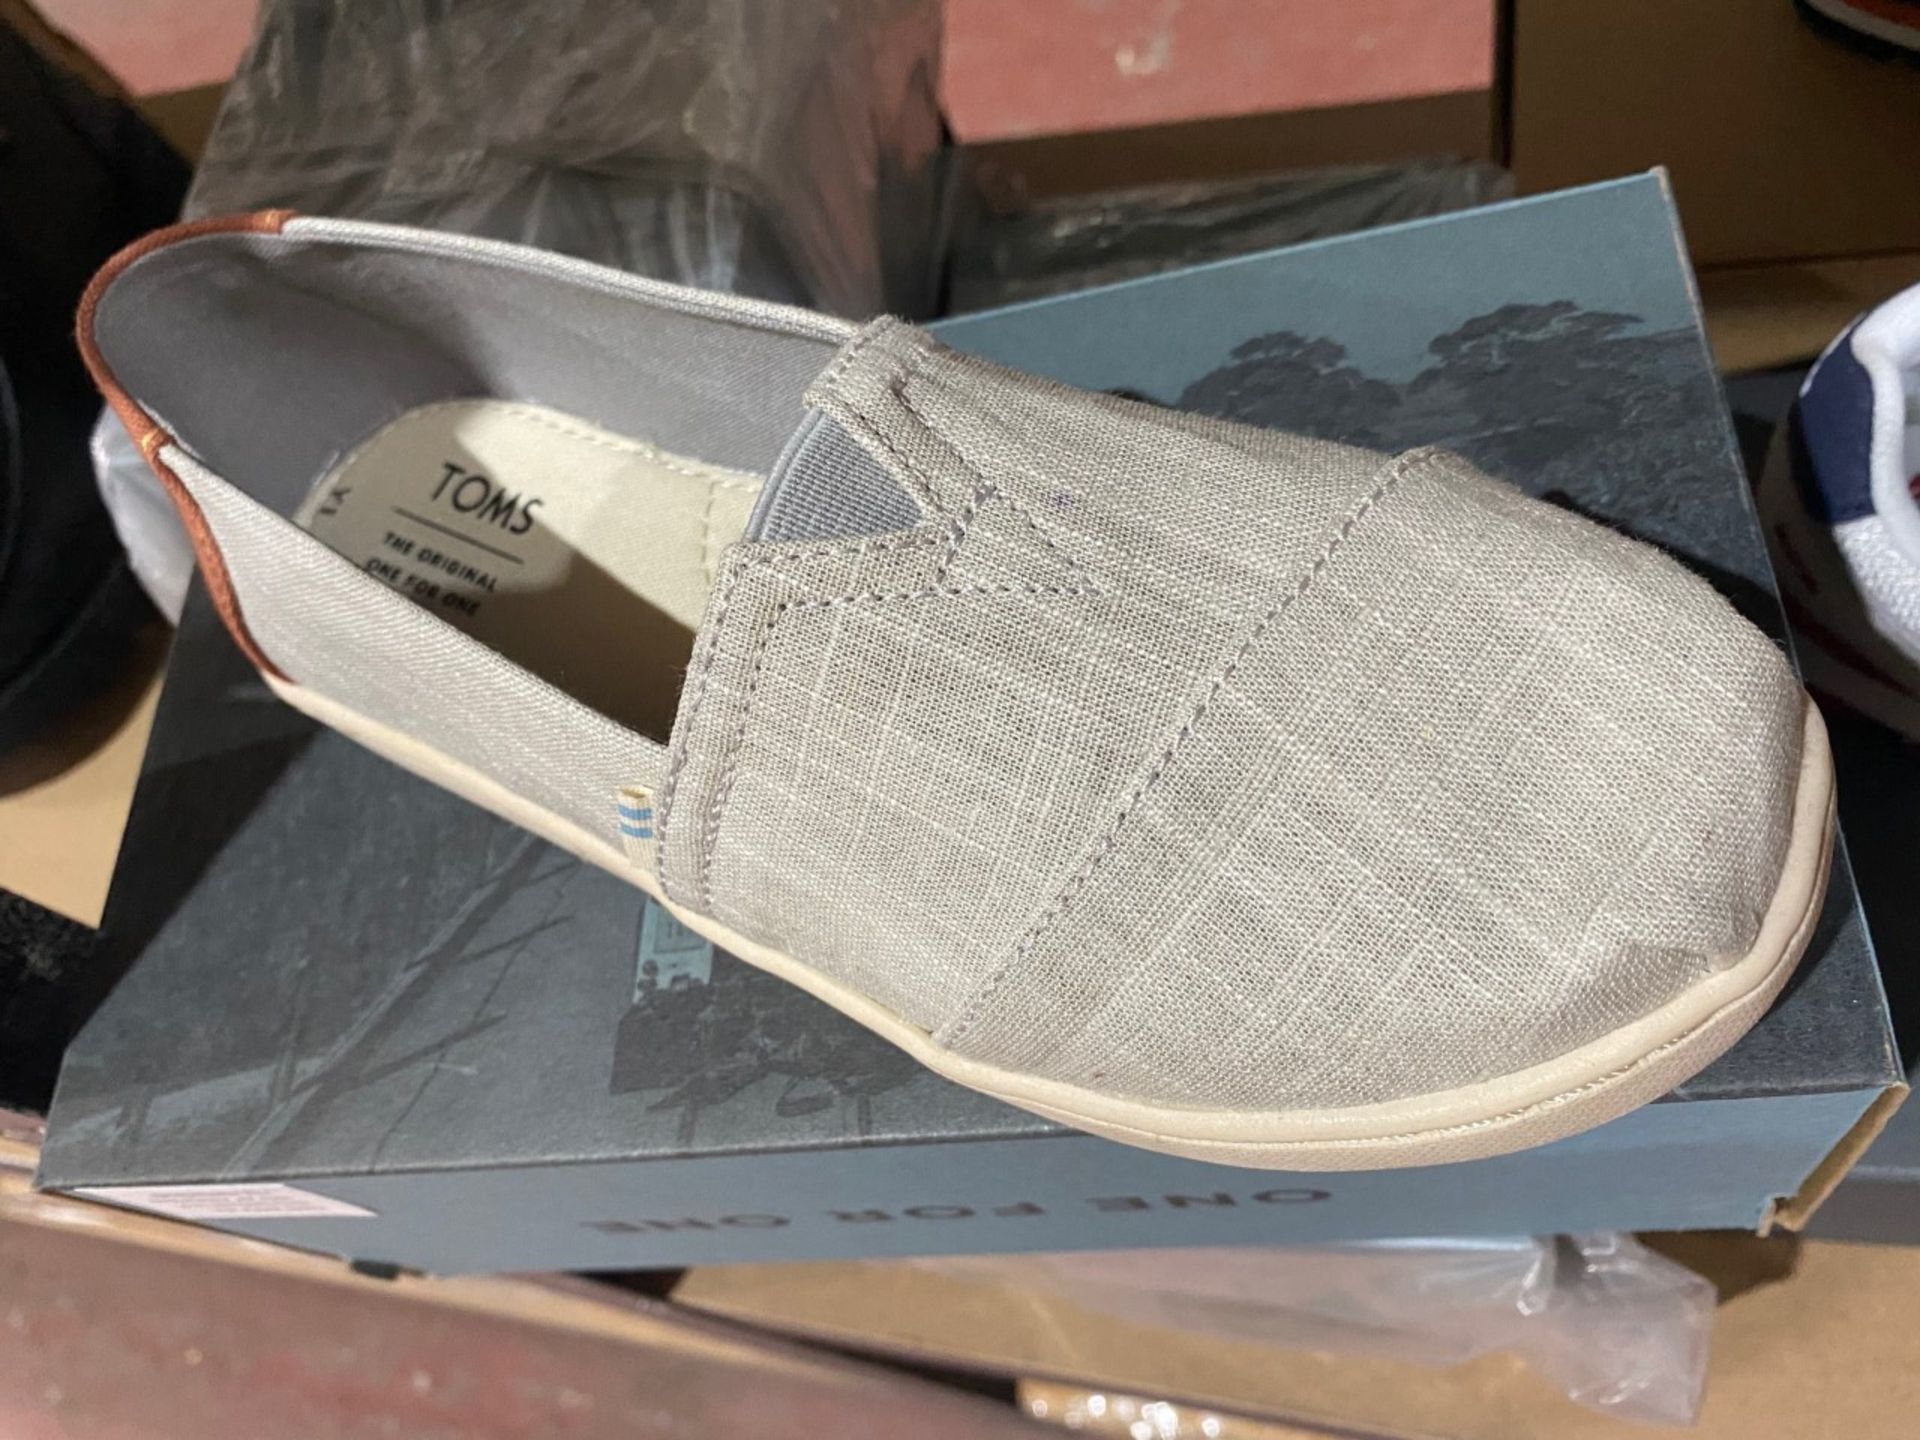 NEW & BOXED TOMS GREY SHOE SIZE INFANT 13 (32/14) - Image 2 of 2